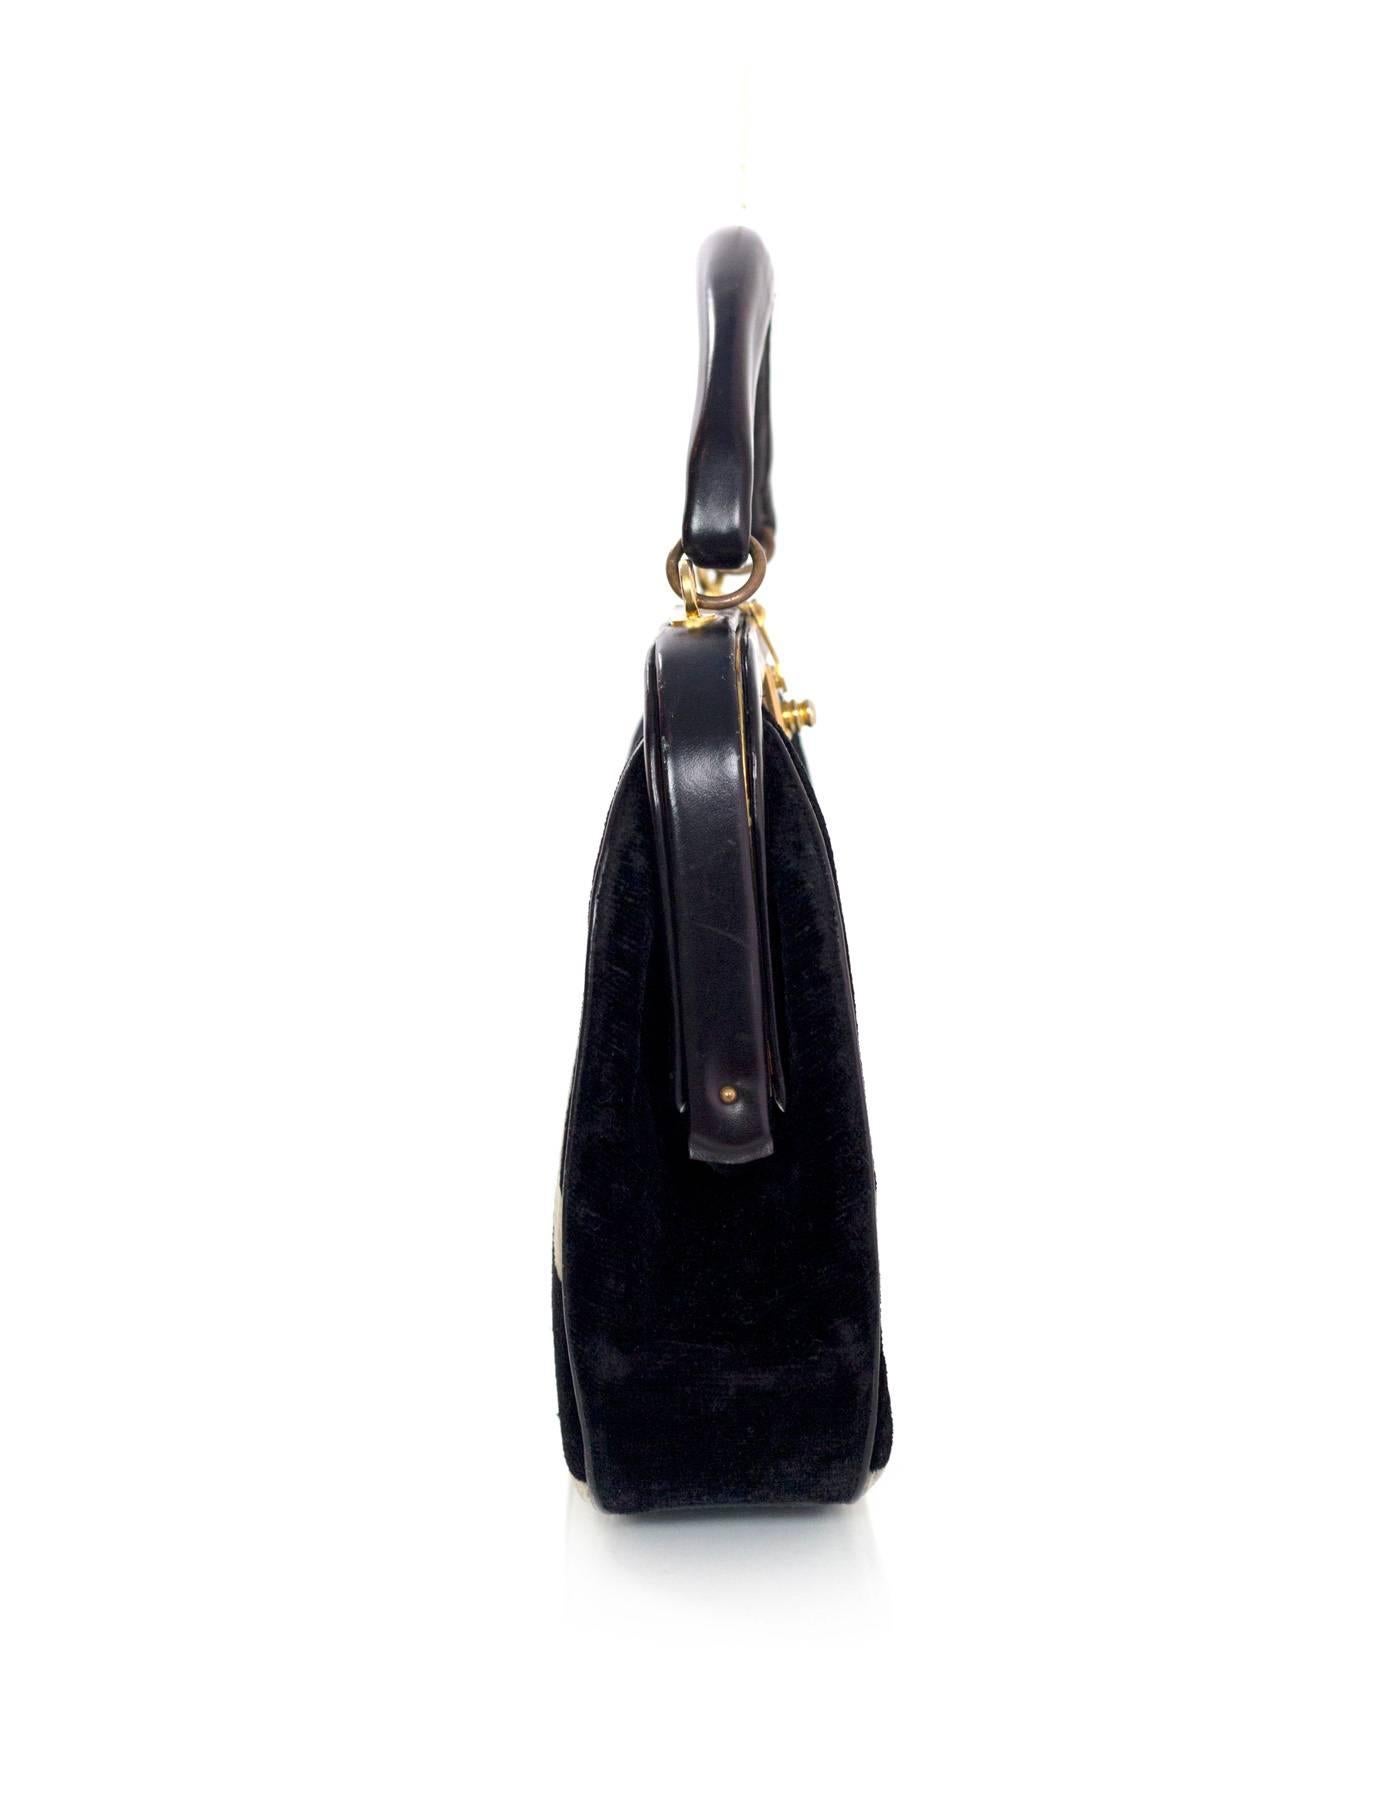 Roberta di Camerino Vintage Black Velvet Frame Bag
Features white velvet detail

Made In: Italy
Color: Black and white
Hardware: Goldtone
Materials: Velvet and leather
Lining: Black leather
Closure/Opening: Frame style opening with push